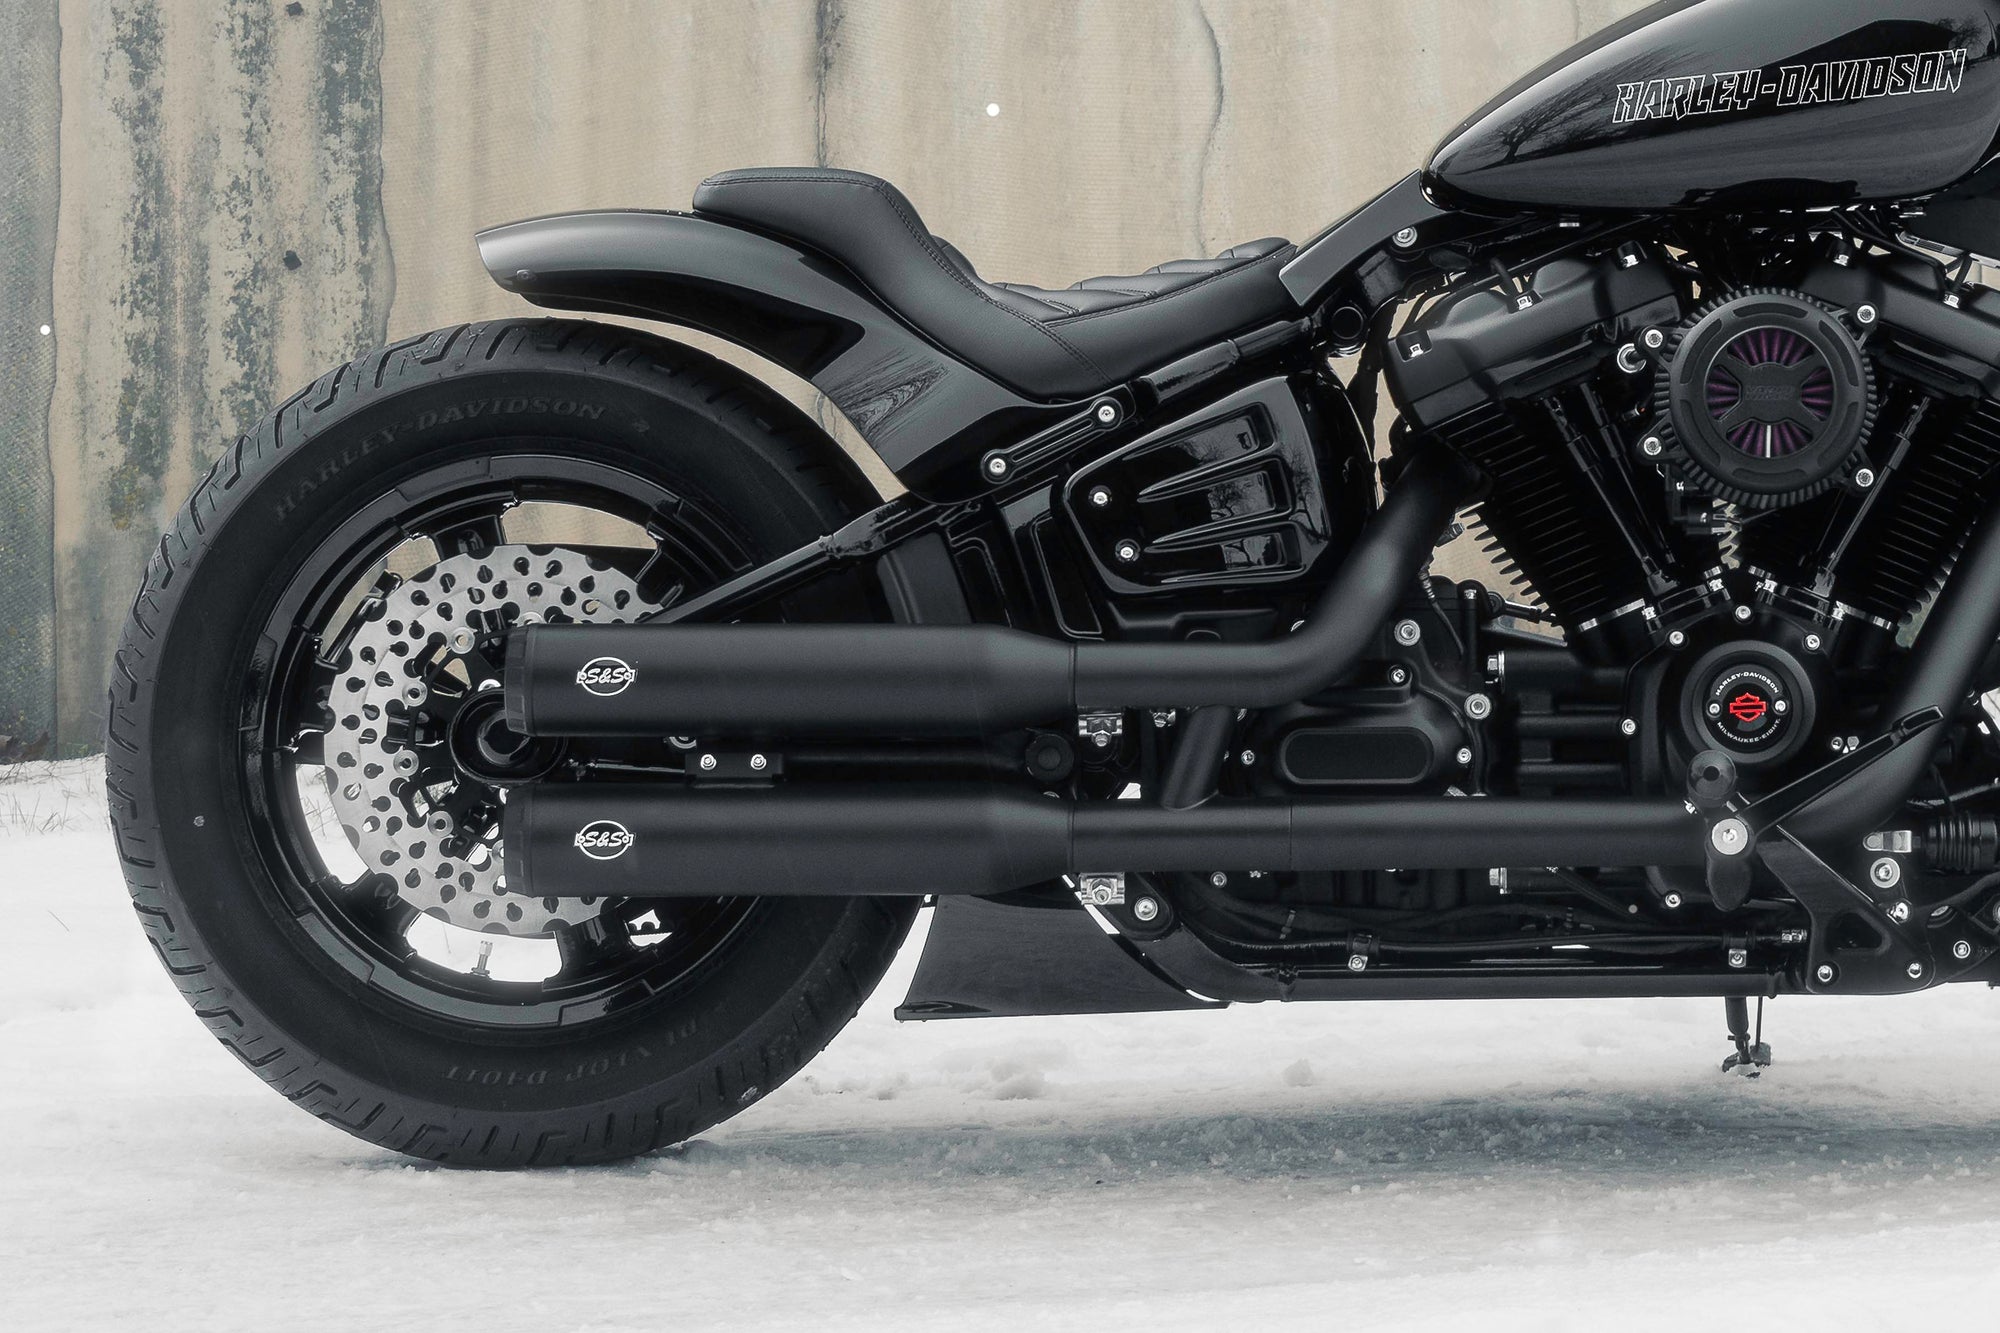 Zoomed Harley Davidson motorcycle with Killer Custom parts from the side with some visible snow on the ground neutral background